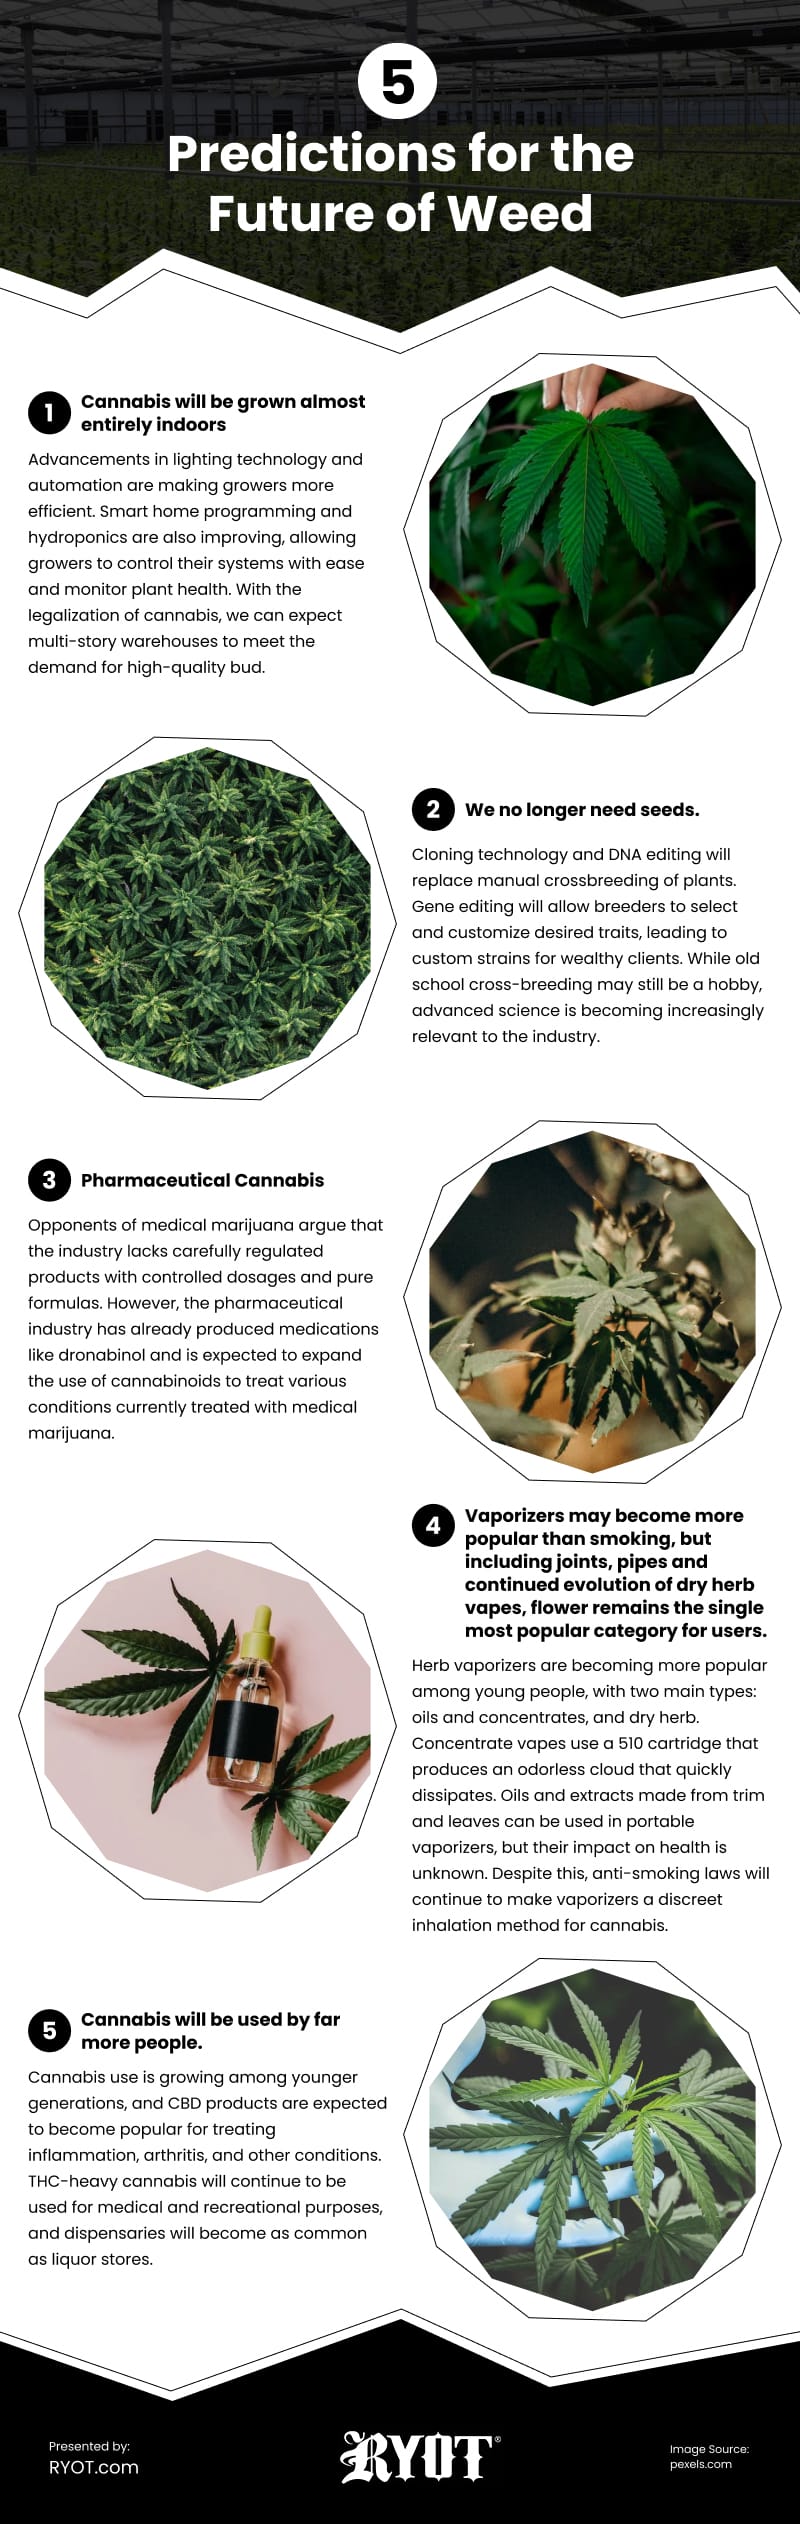 5 Predictions for the Future of Weed Infographic